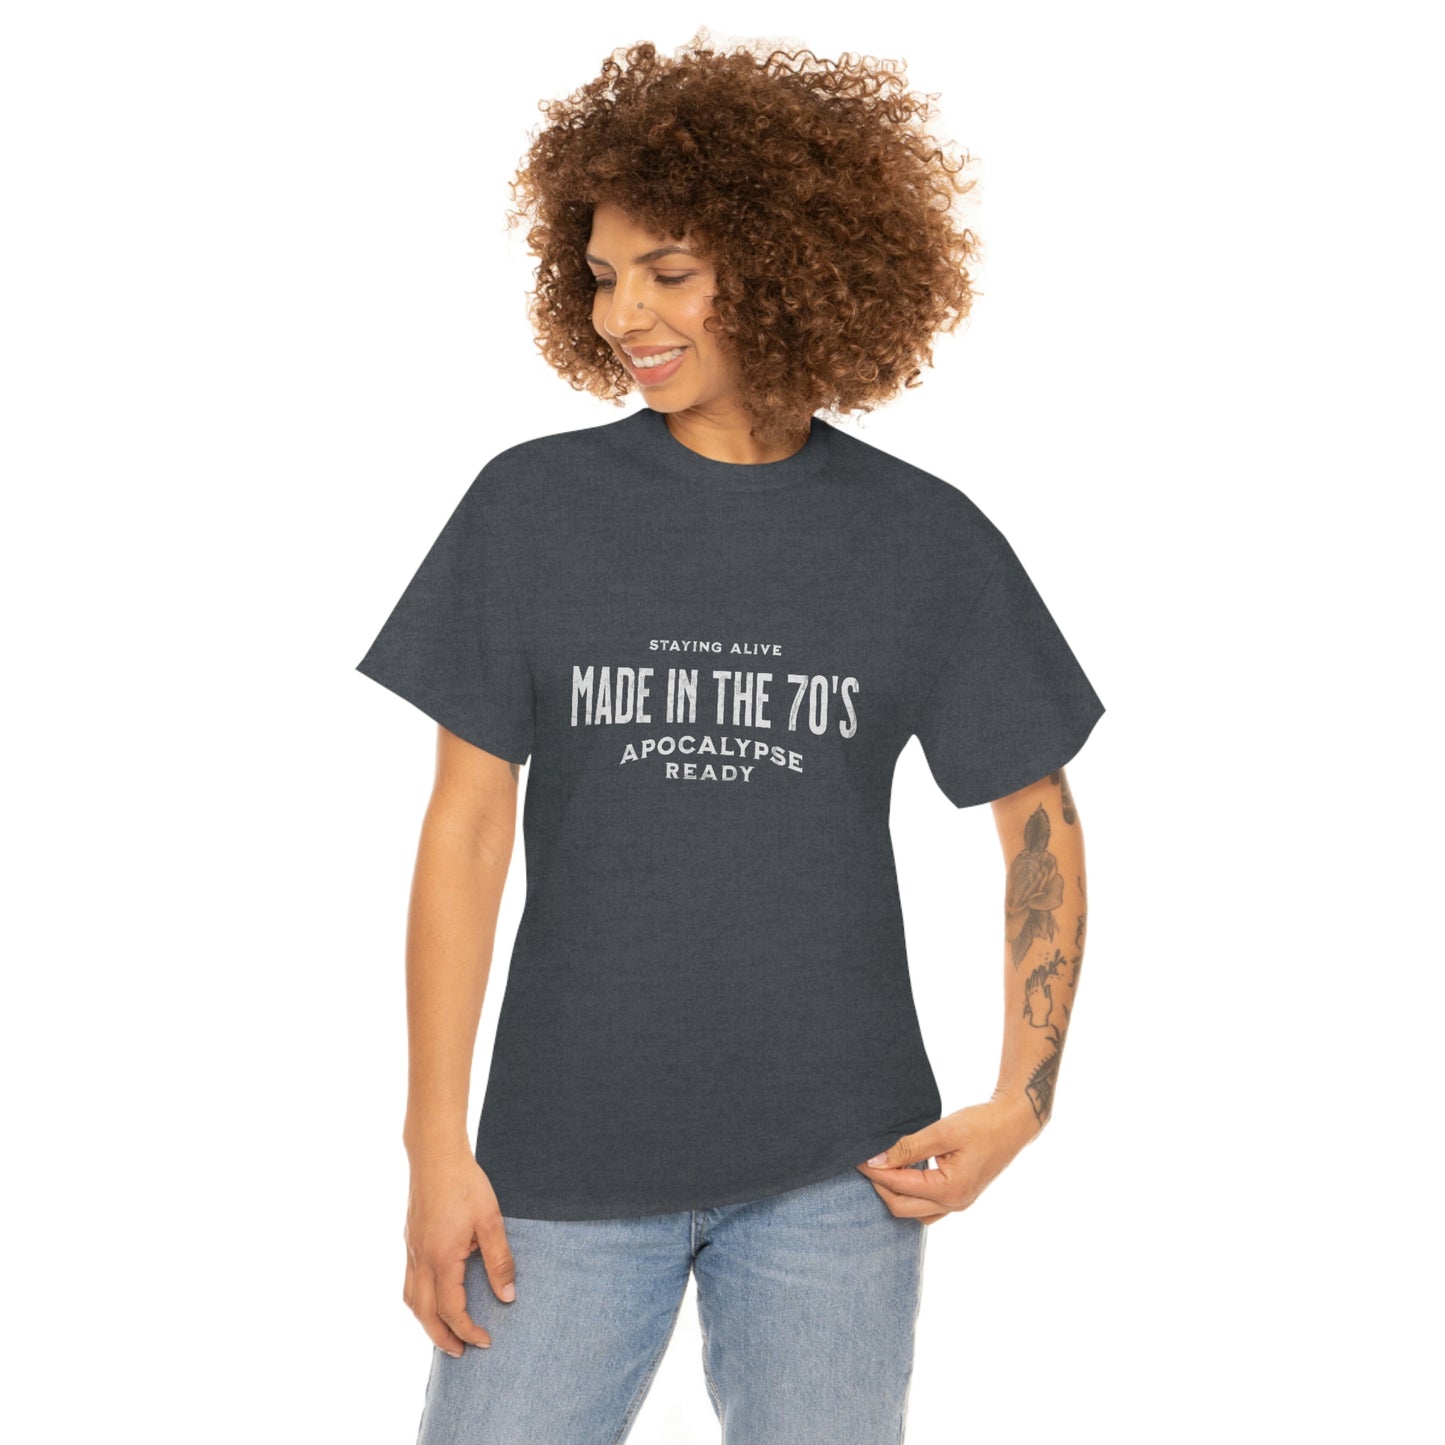 Staying Alive Unisex Cotton T-shirt